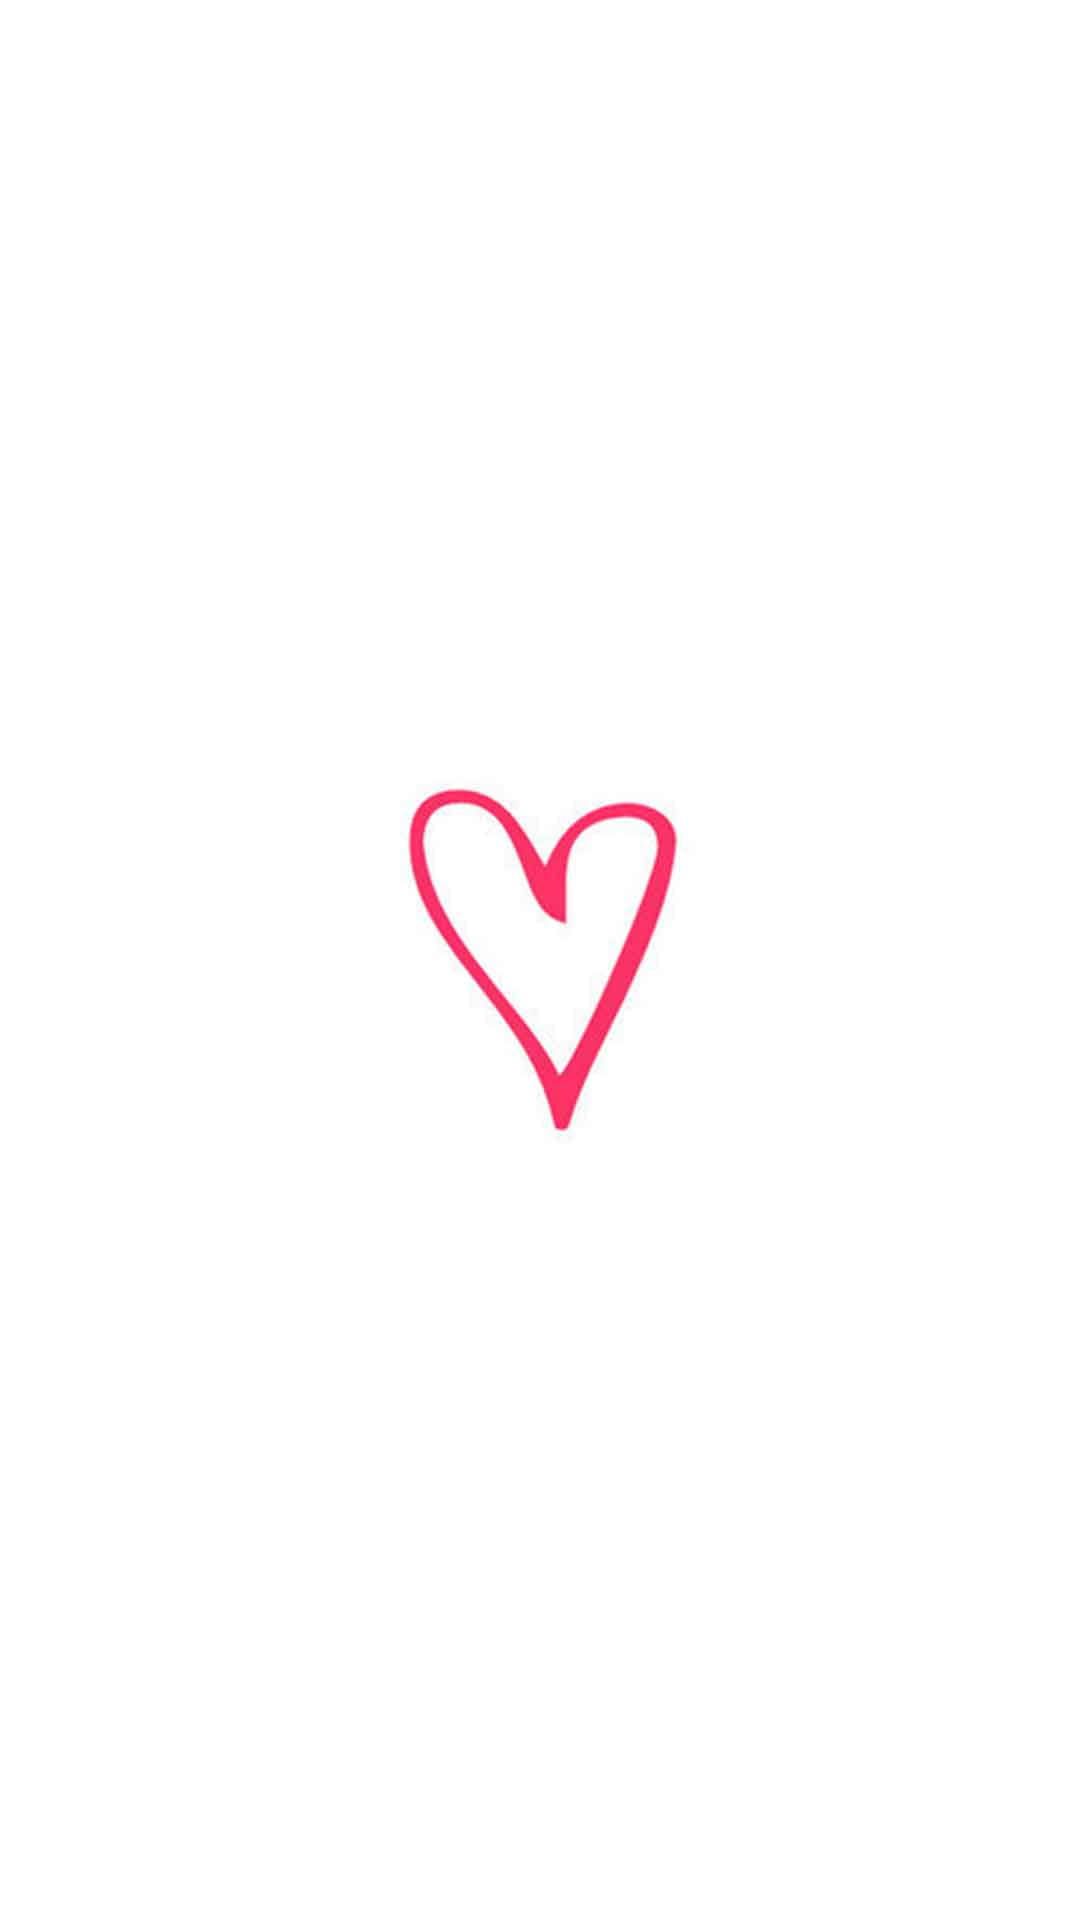 Simple Pink Heart